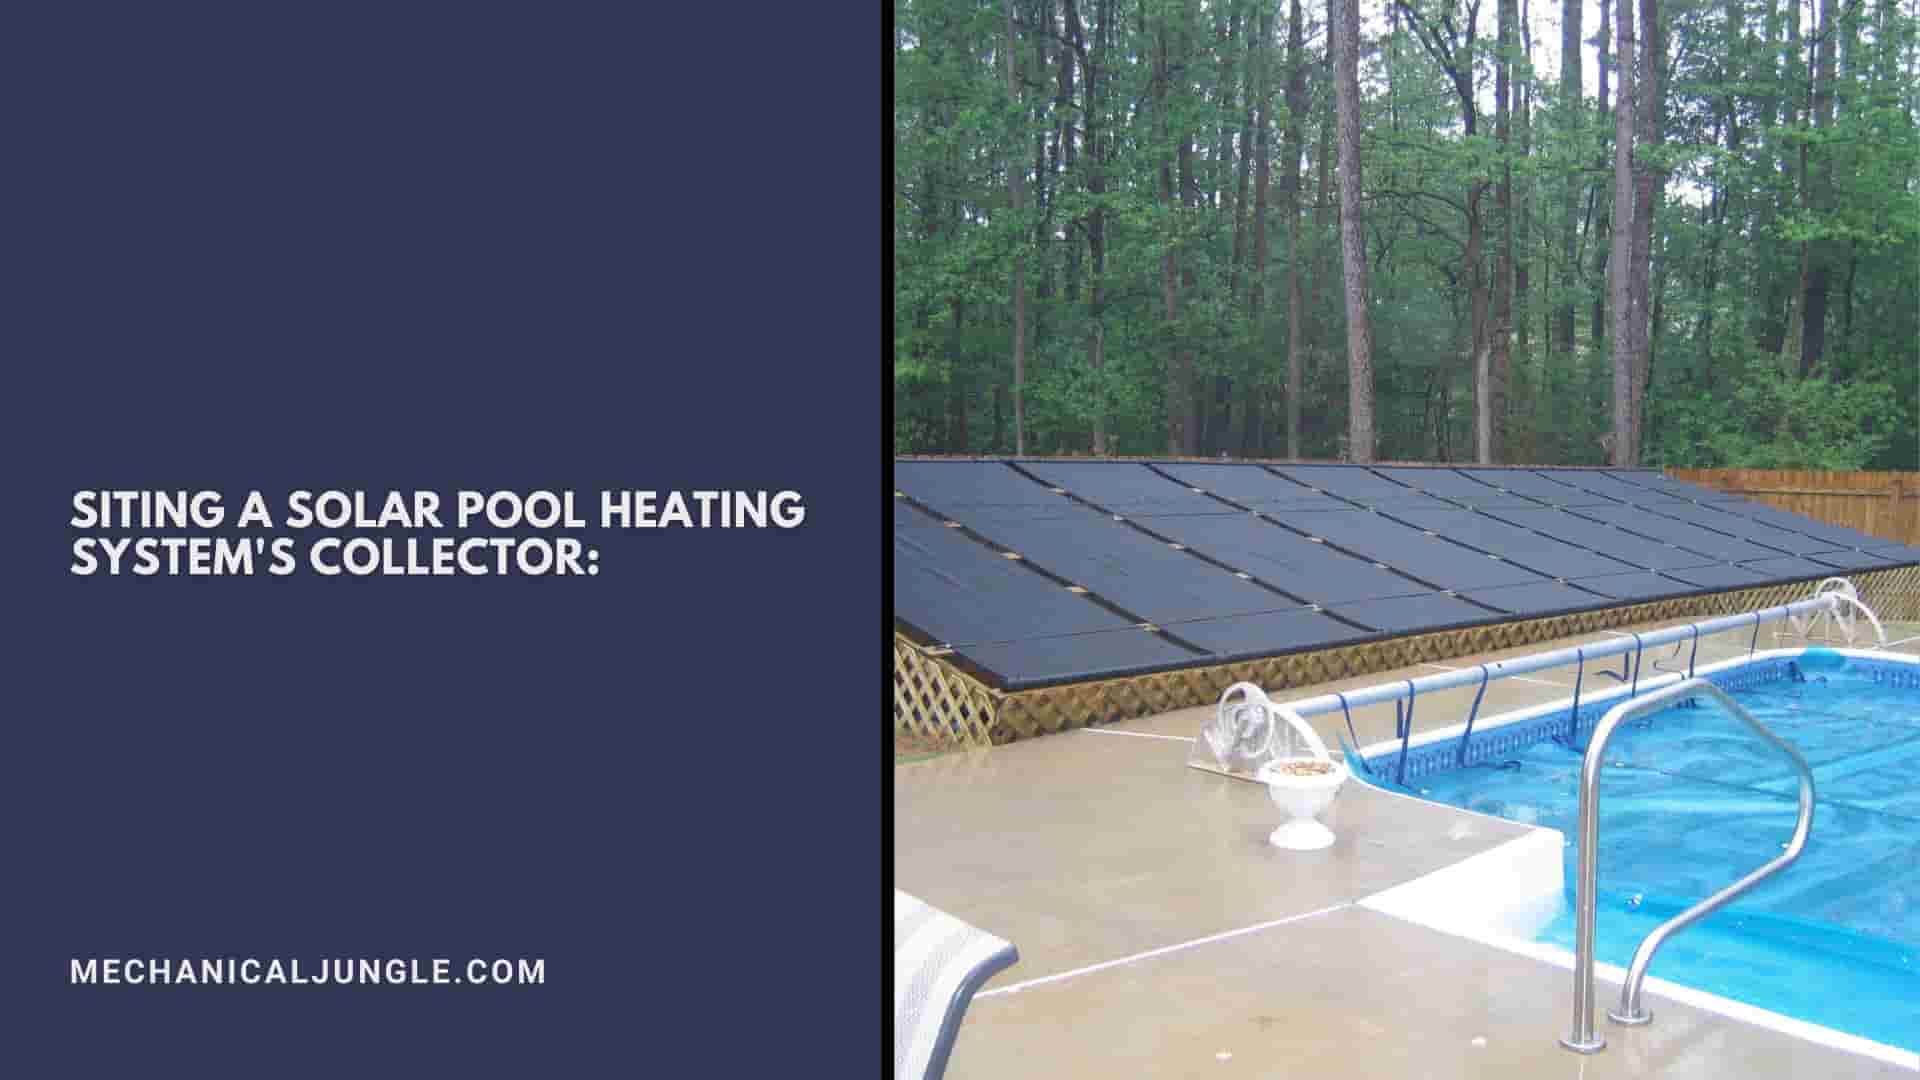 Siting a Solar Pool Heating System's Collector: